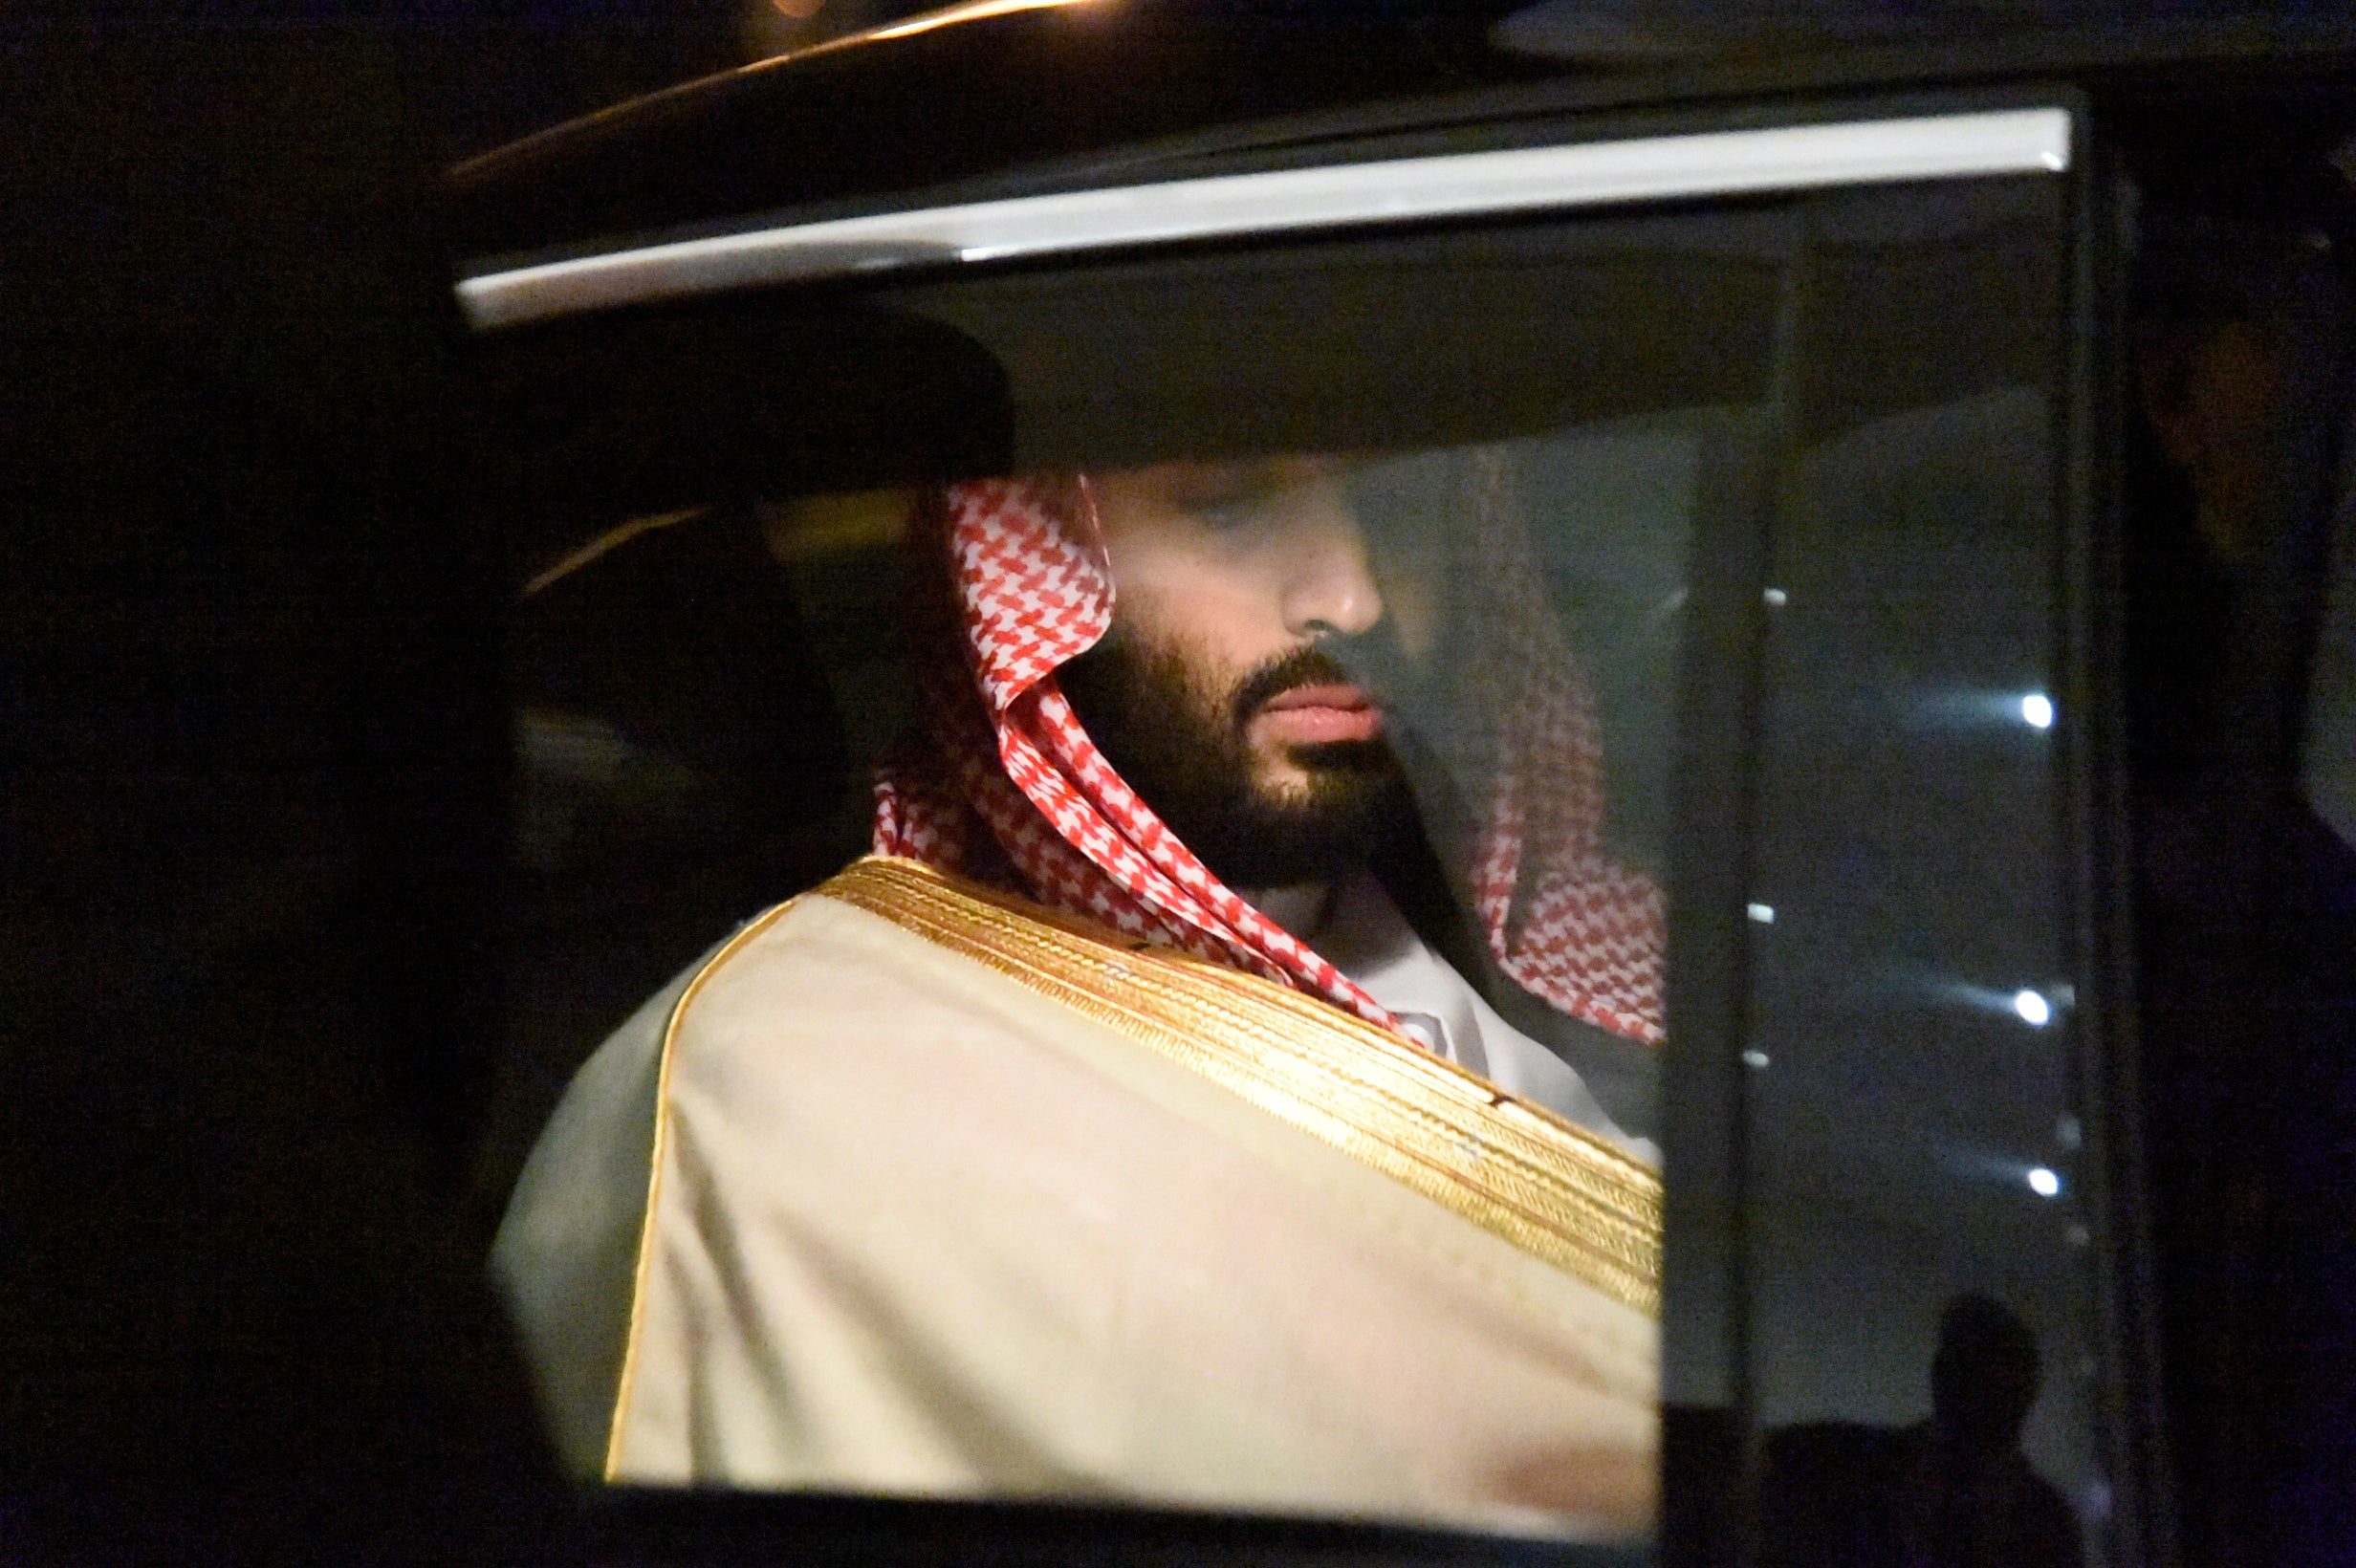 Saudi crown prince Mohammed bin Salman is driven to a meeting with the Algerian prime minister on a previous visit to Algiers in 2018